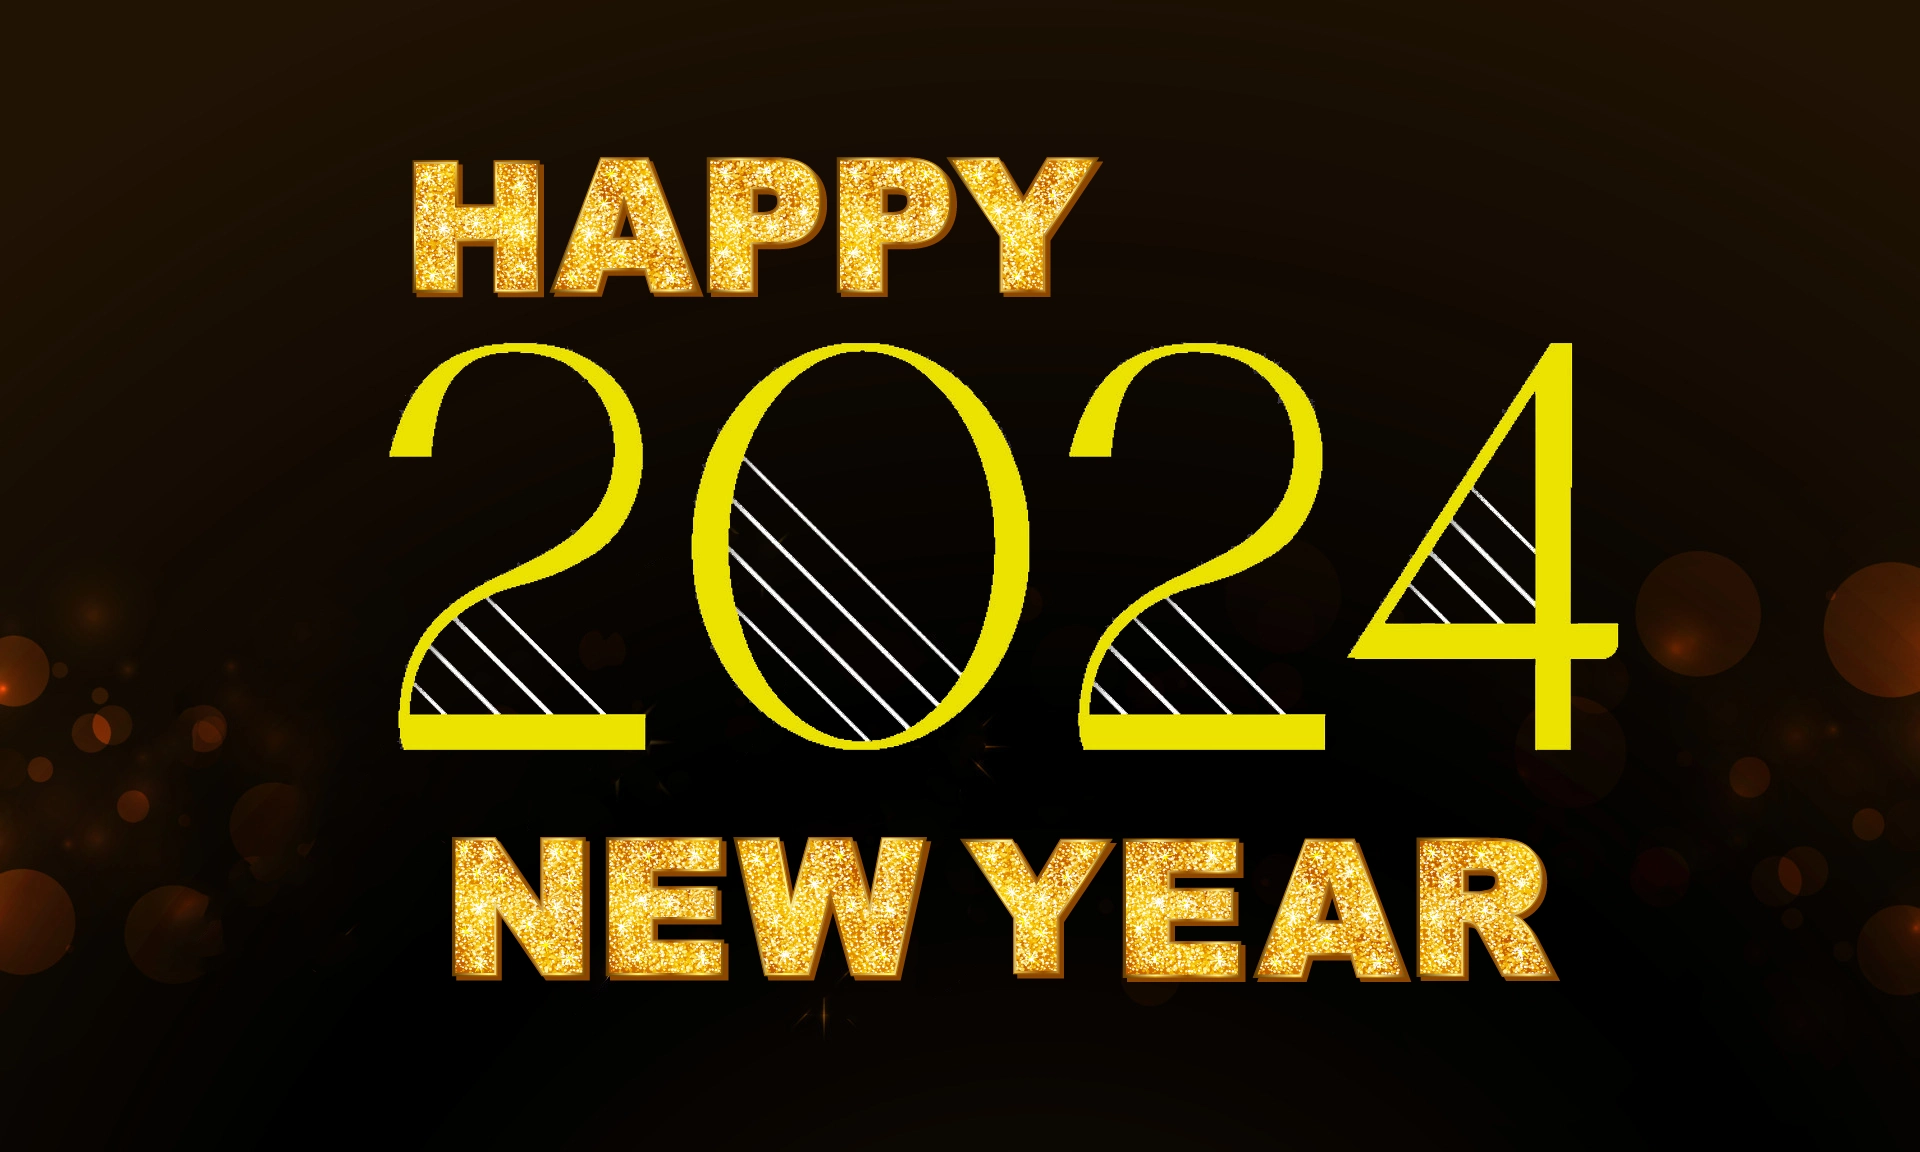 Happy New Year 2024 free wallpaper, image, photo, HD image Download